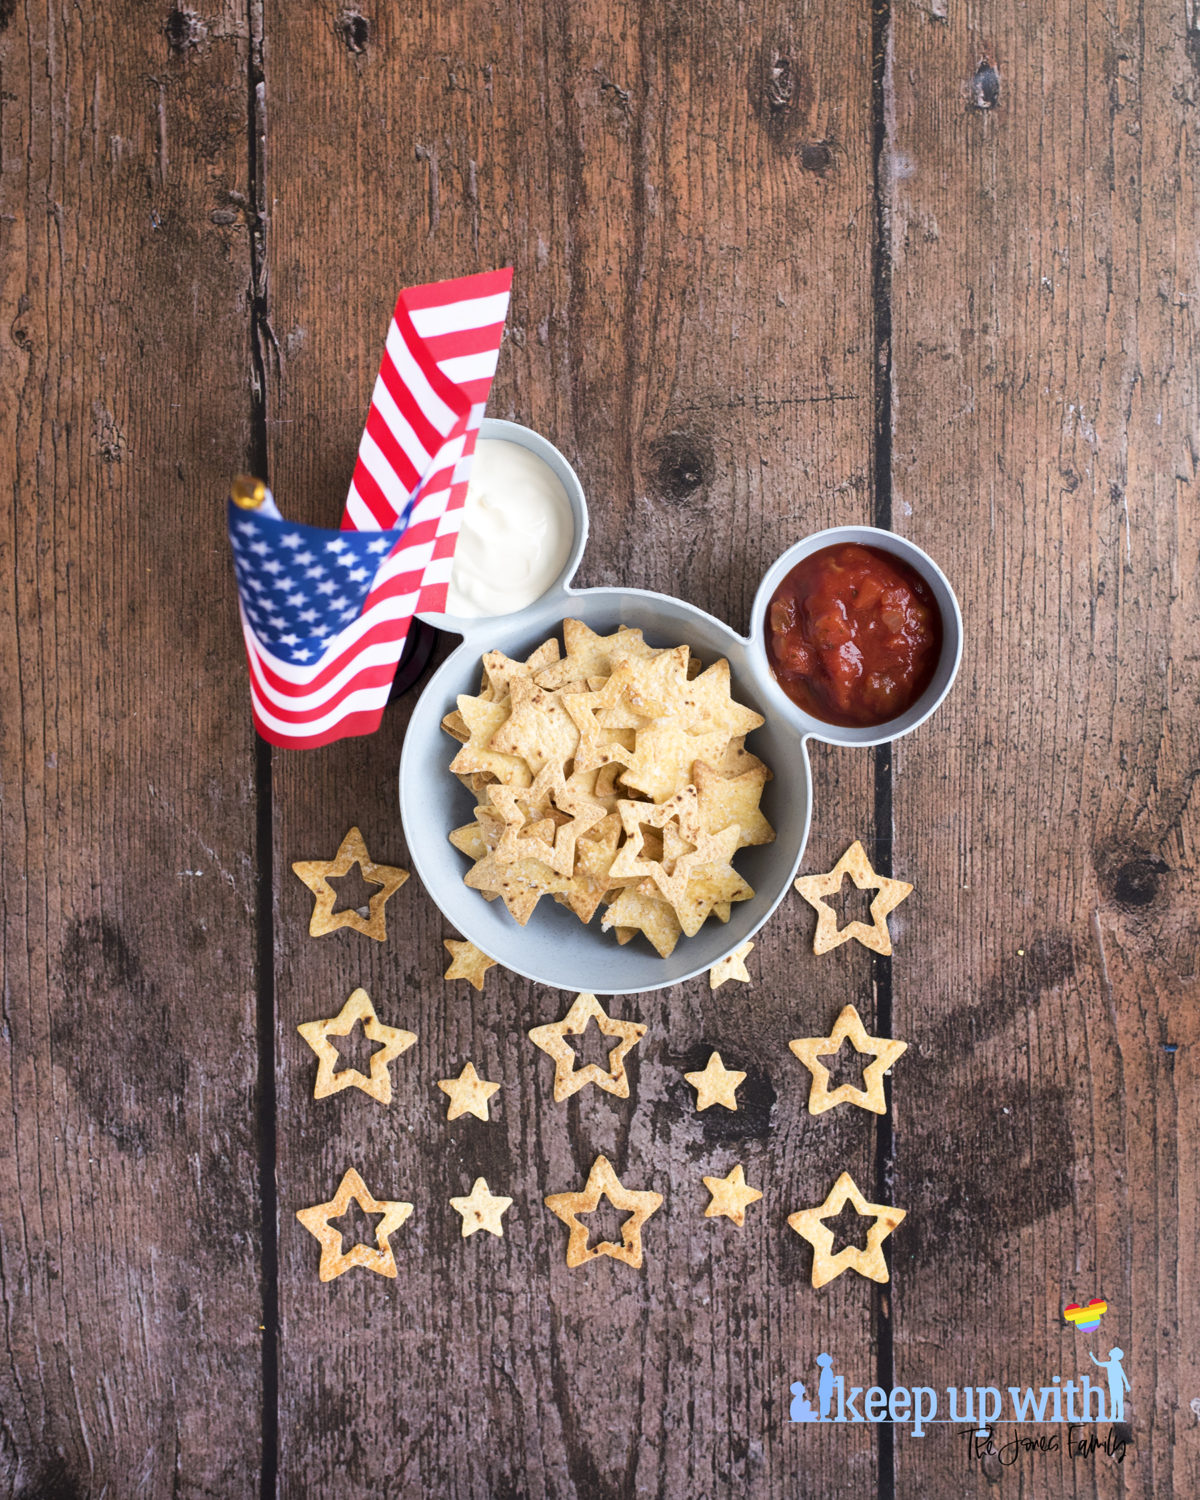 Image shows a blue bowl in the shape of Mickey Mouse suitable for chips 'n' dip. There is an American flag stood close to the bowl and inside the bowl is tomato salsa, soured cream, and star spangled nacho chips. Image by keep up with the jones family.